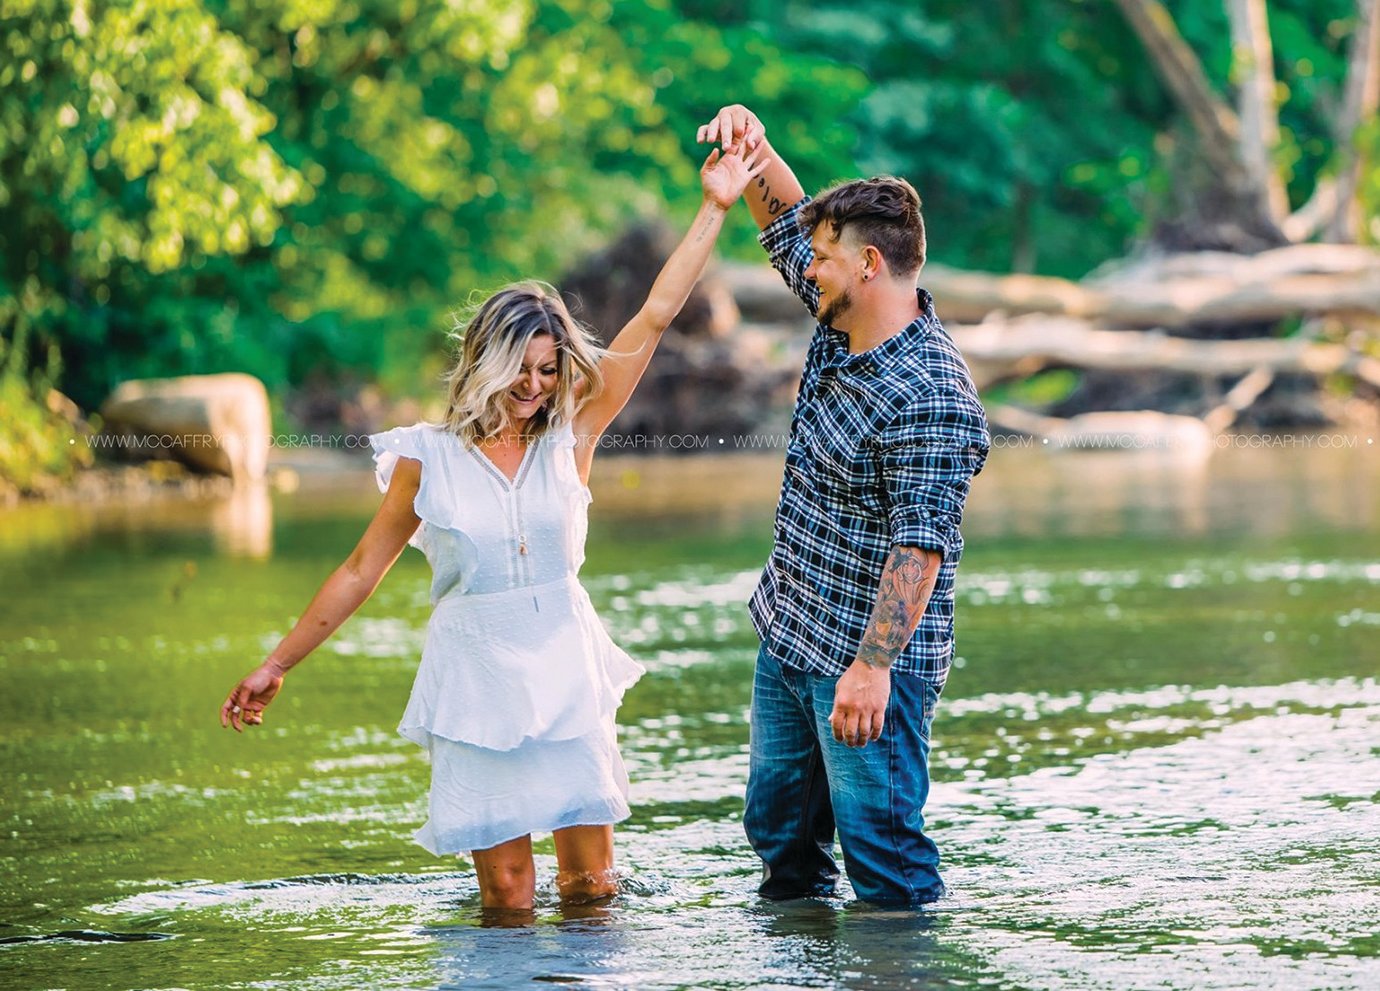 Karmon Waite and Daniel Allen, the subjects of a blind date photoshoot gone viral, test the waters and each other under the Darlington Covered Bridge in June.